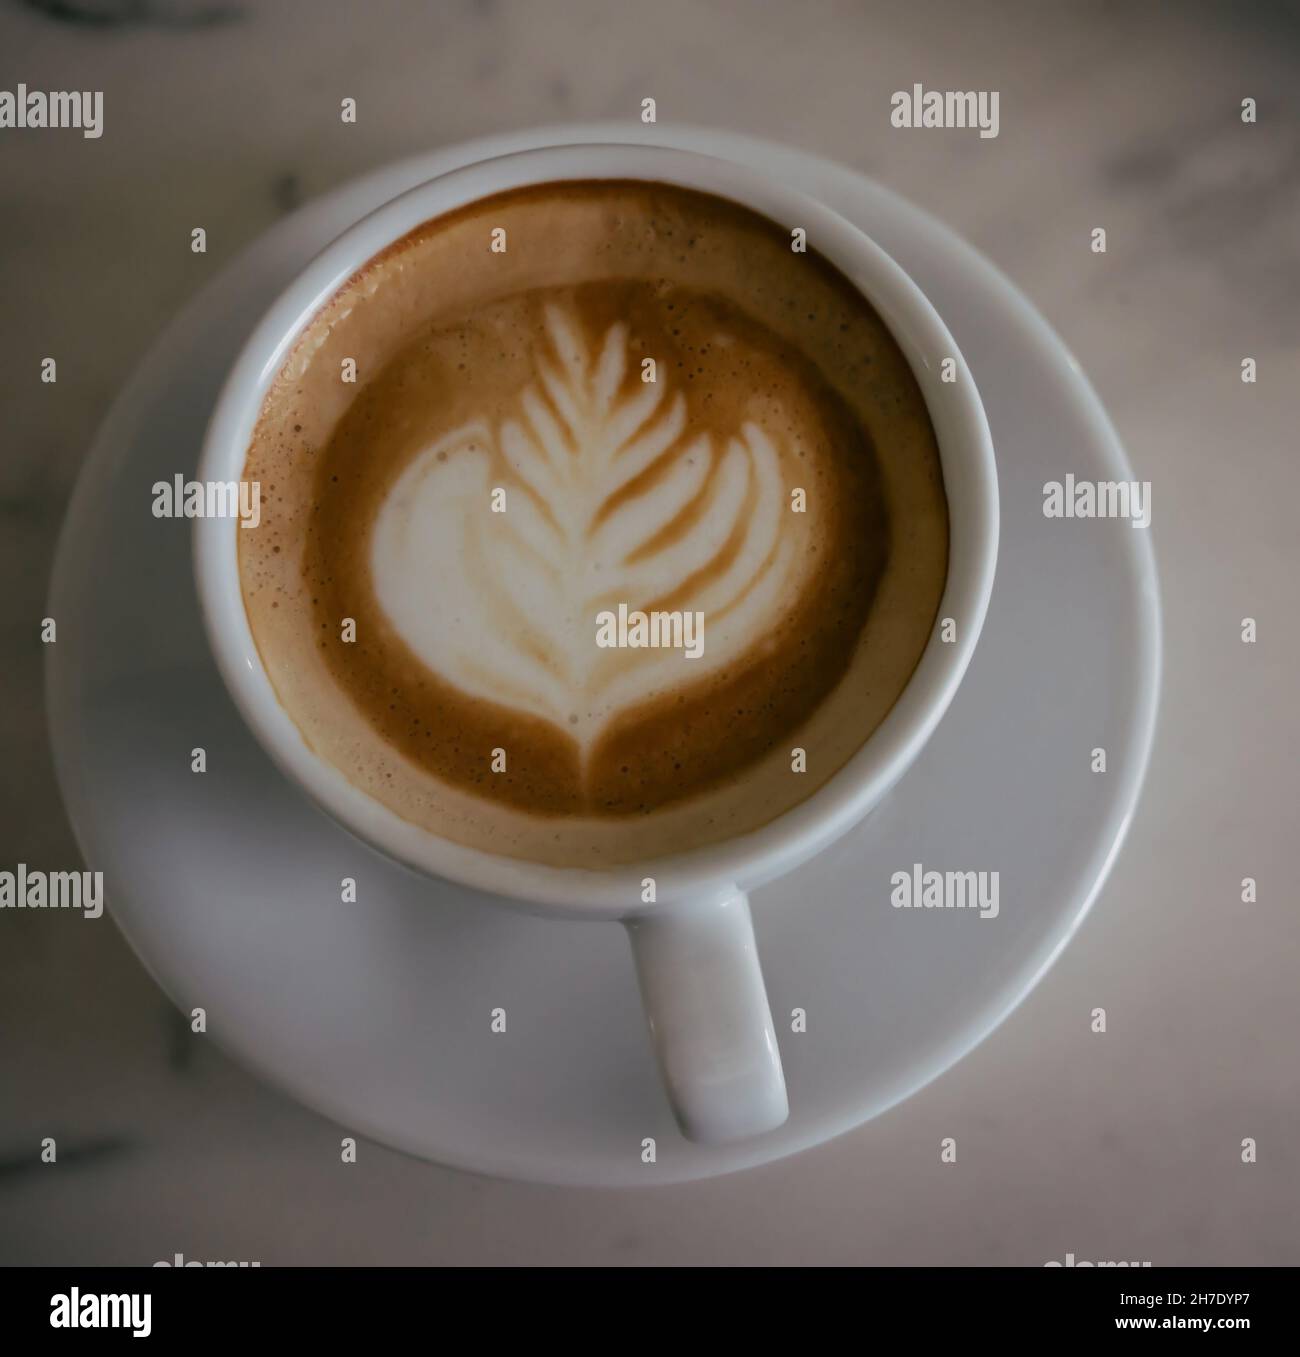 cup of cappuccino on a table with latte art Stock Photo